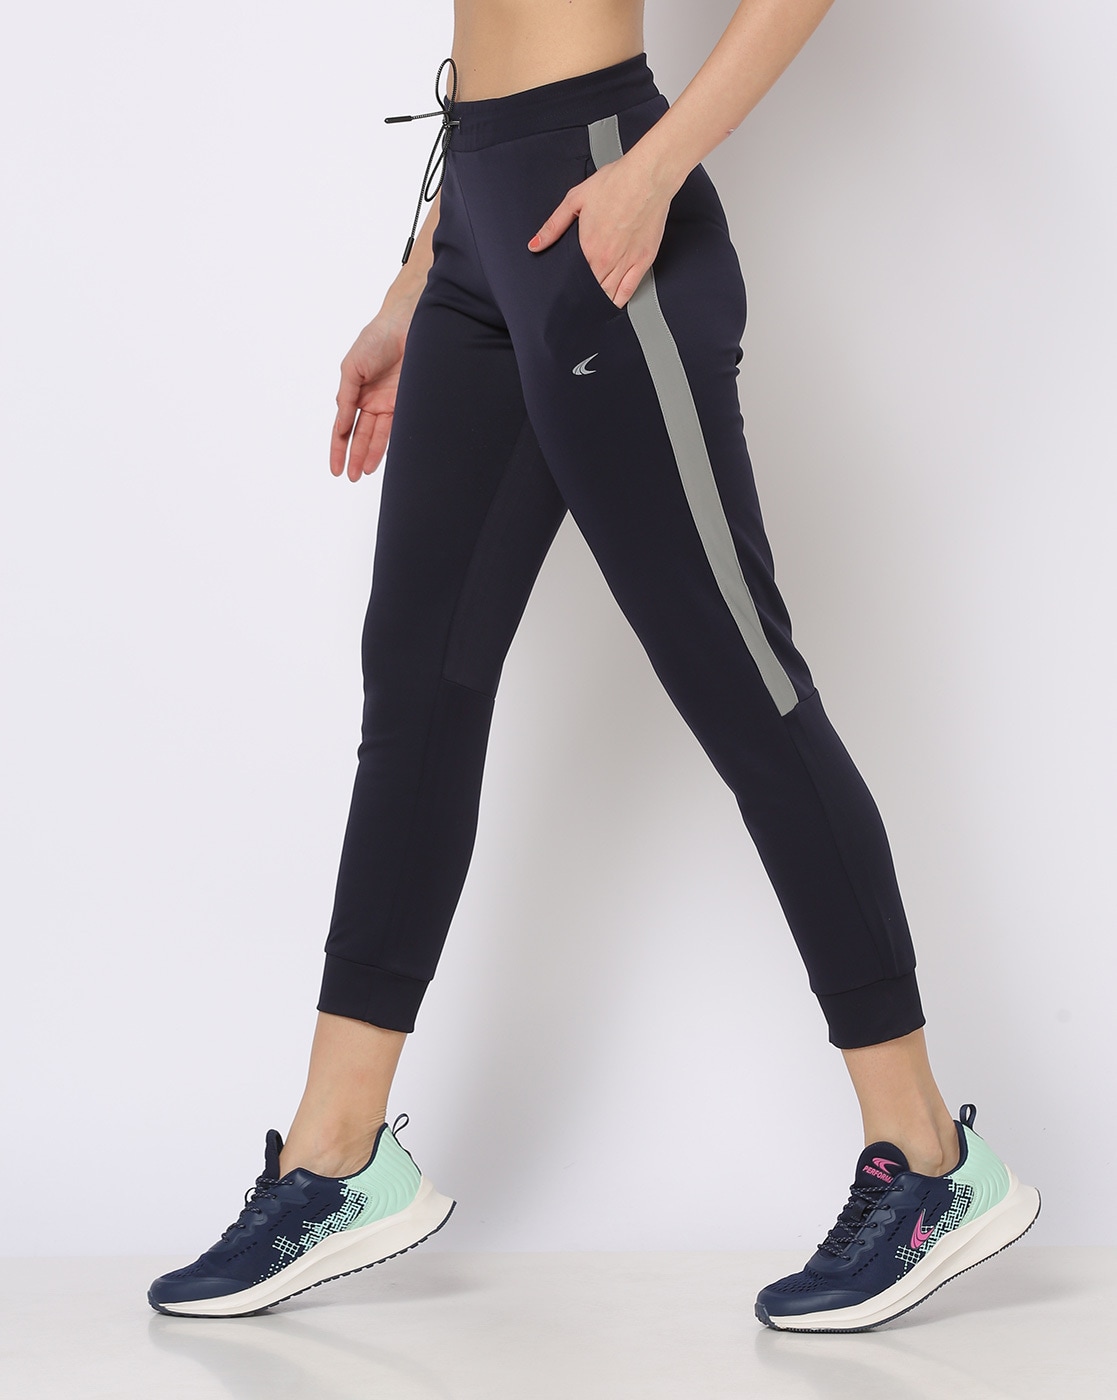 active track pant for girls and women gym wear lycra dry fit fabric gym  track pant in best qaulity and cheapest price